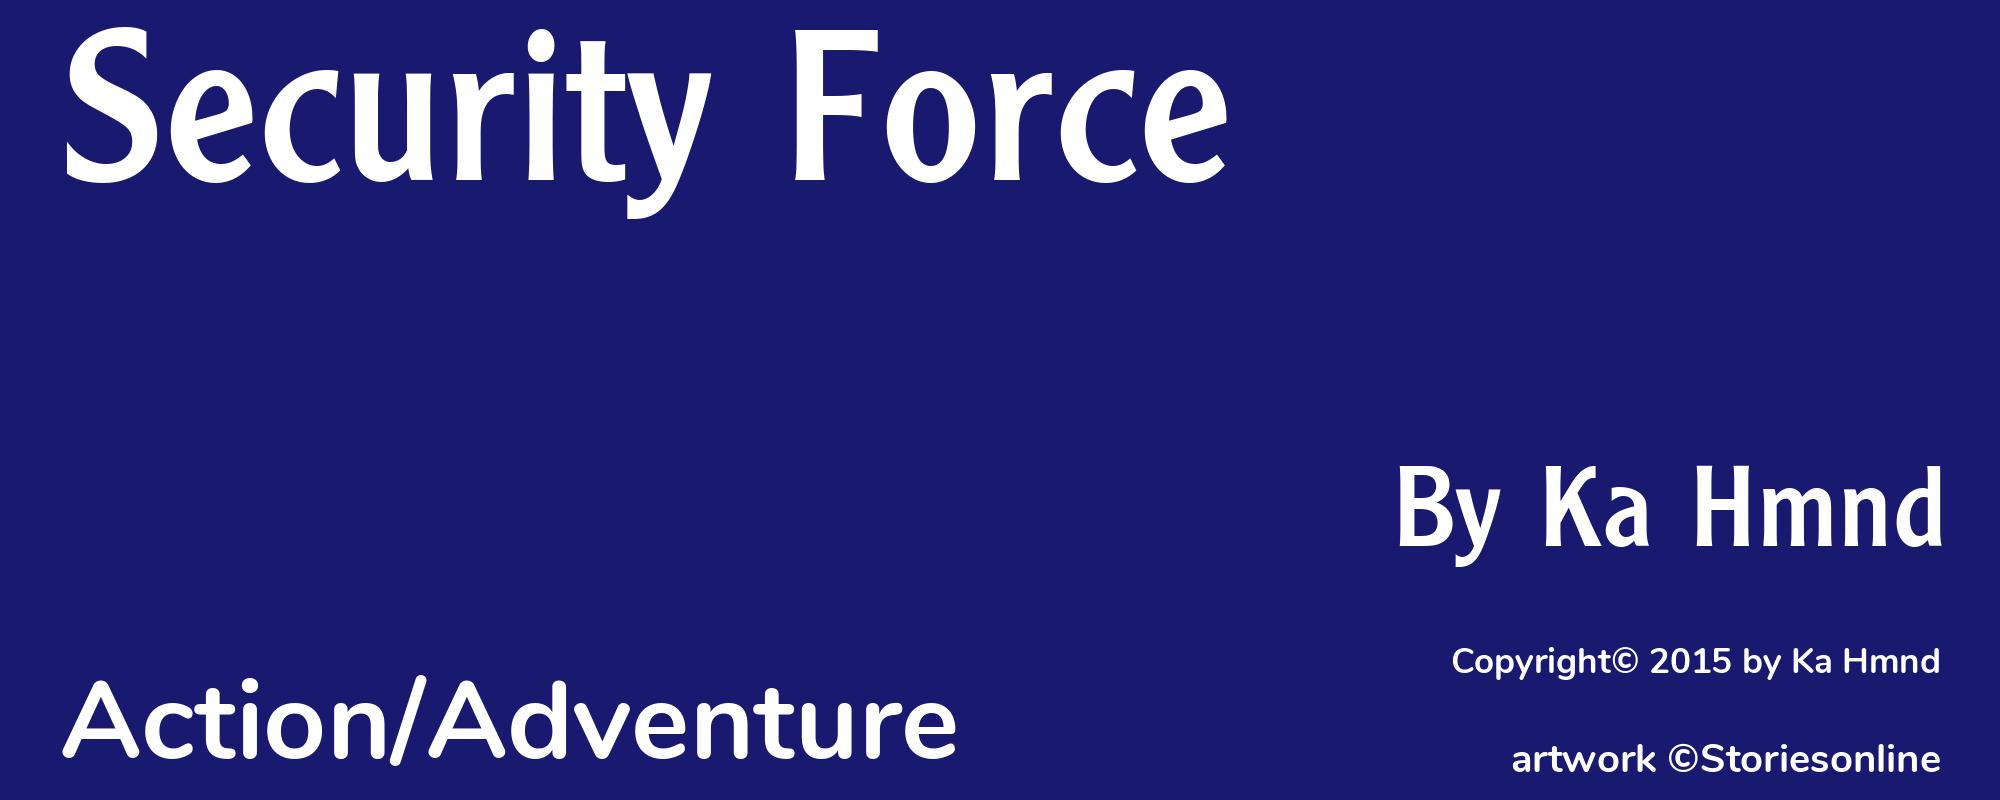 Security Force - Cover